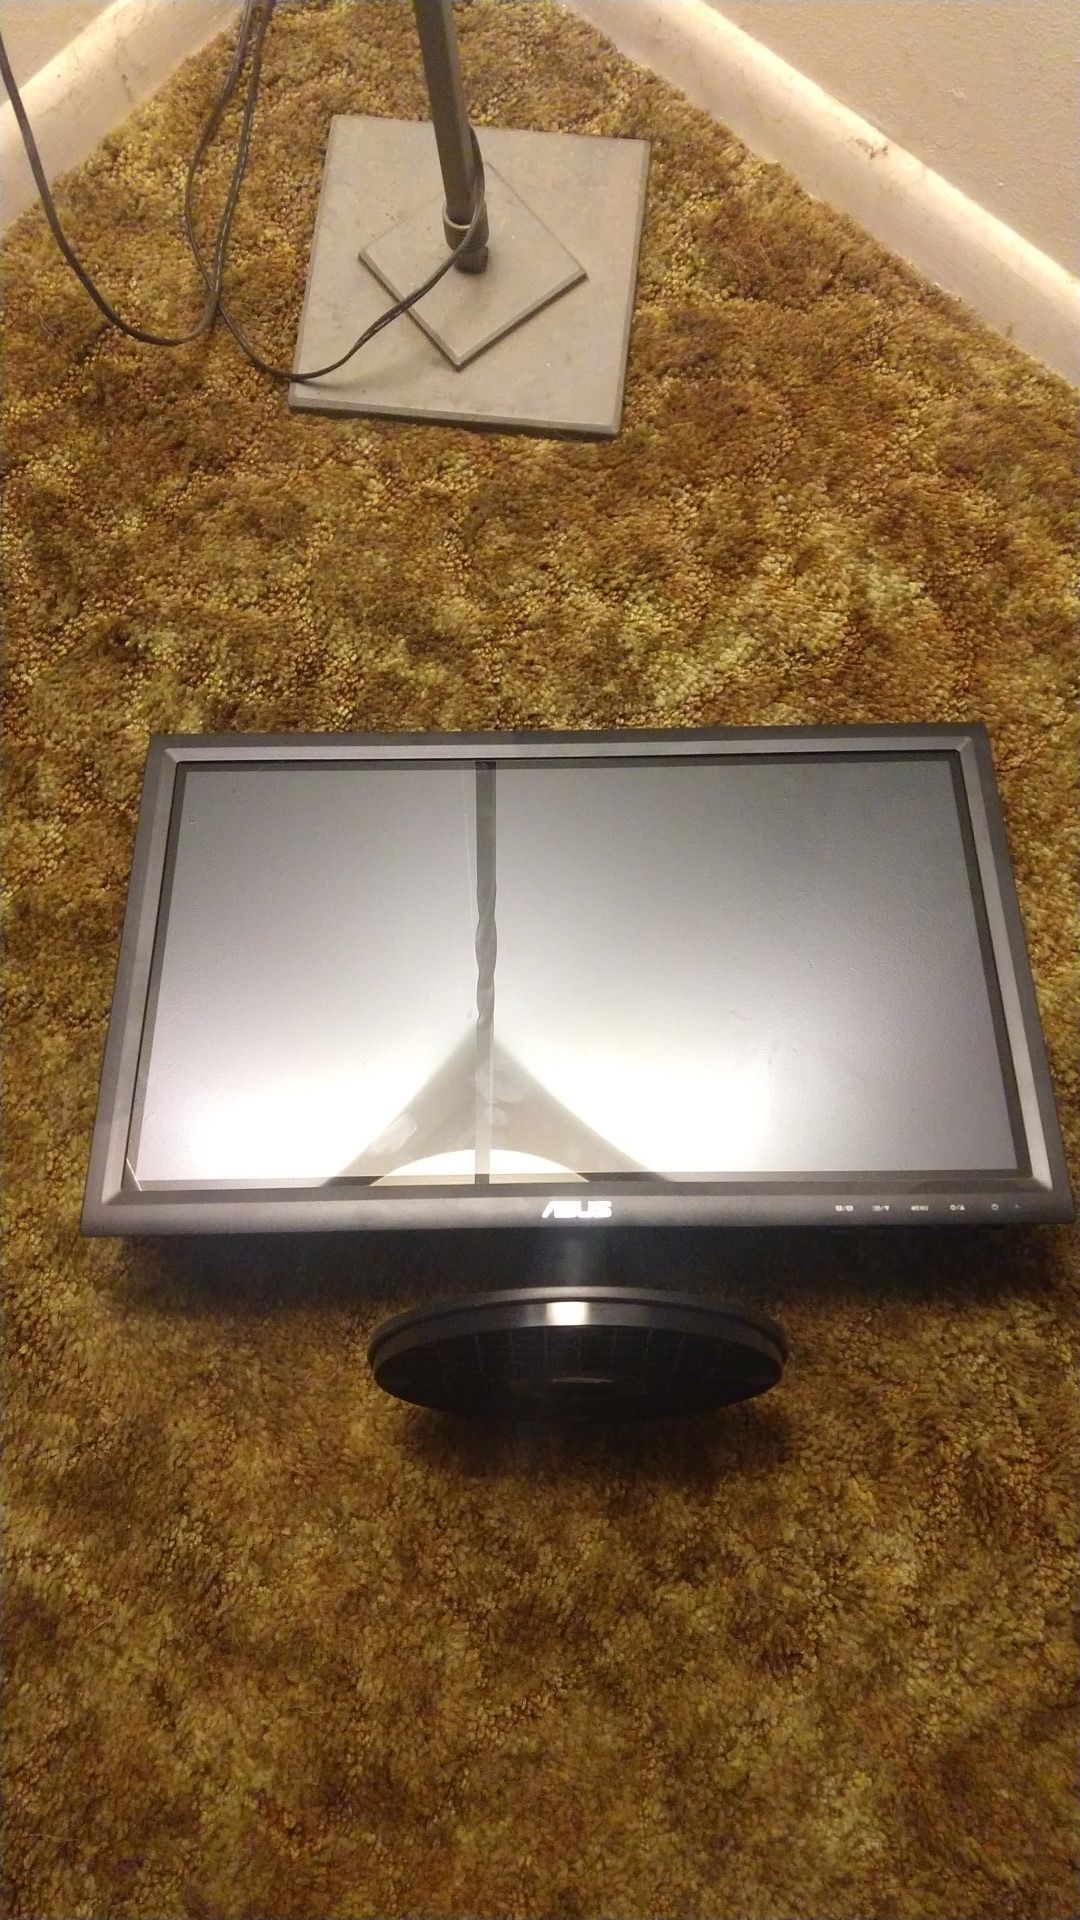 Asus vt207n touch screen monitor 19.5